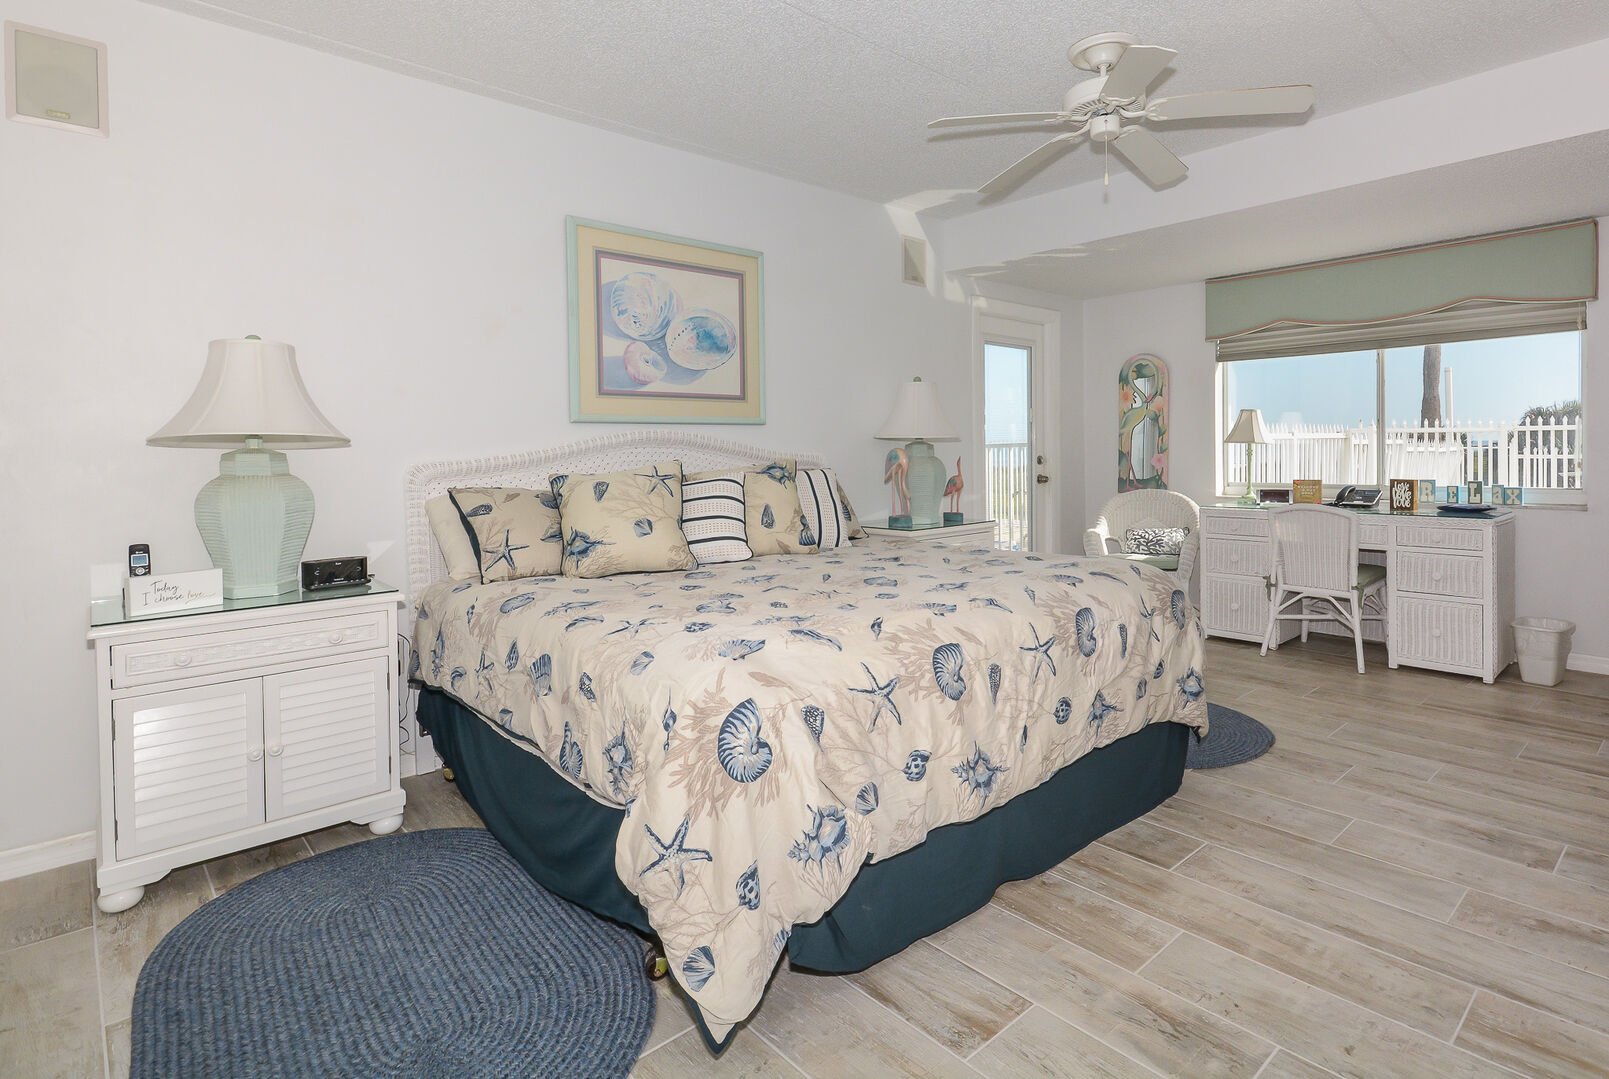 Spacious, ocean view master bedroom with king sized bed, TV, desk, access to patio and private bath.